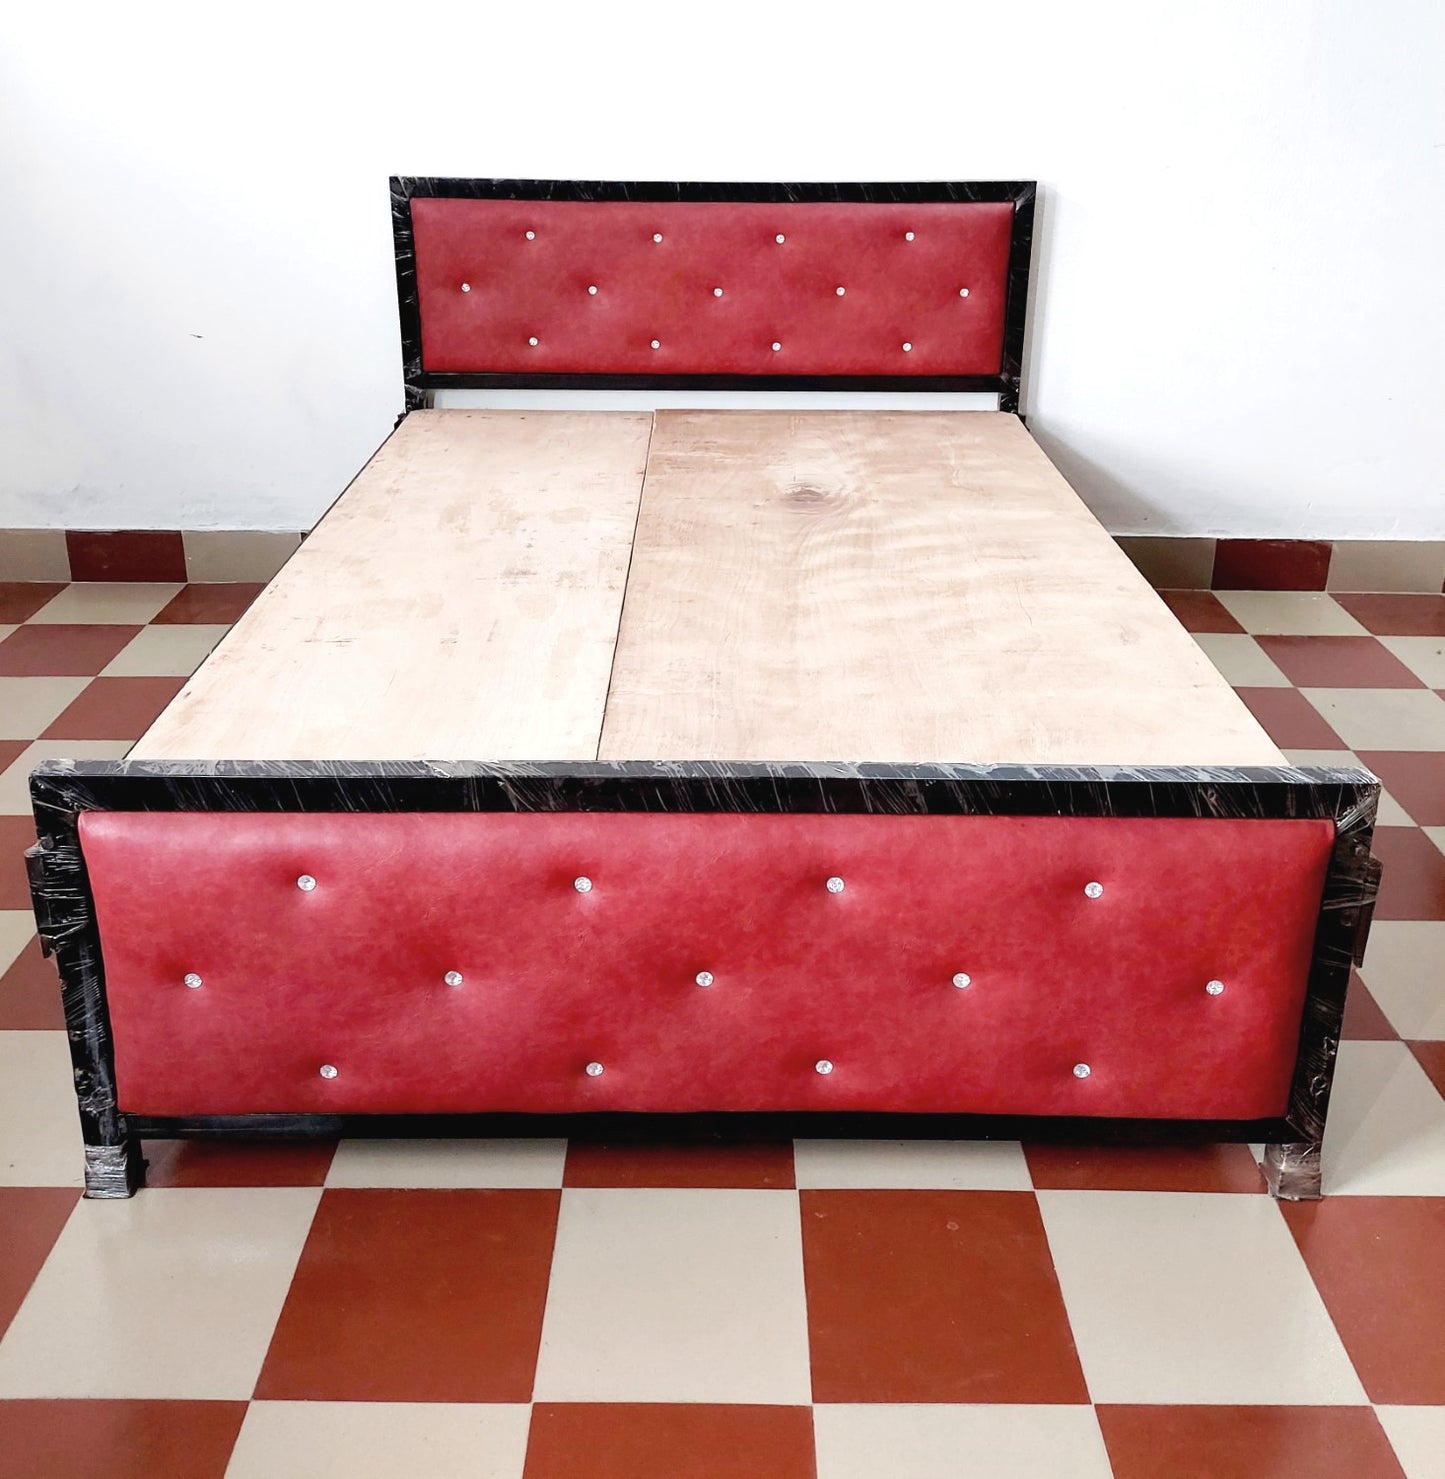 Bowzar King Size Premium Quality Bed With Sides Upholstered Cherry Red